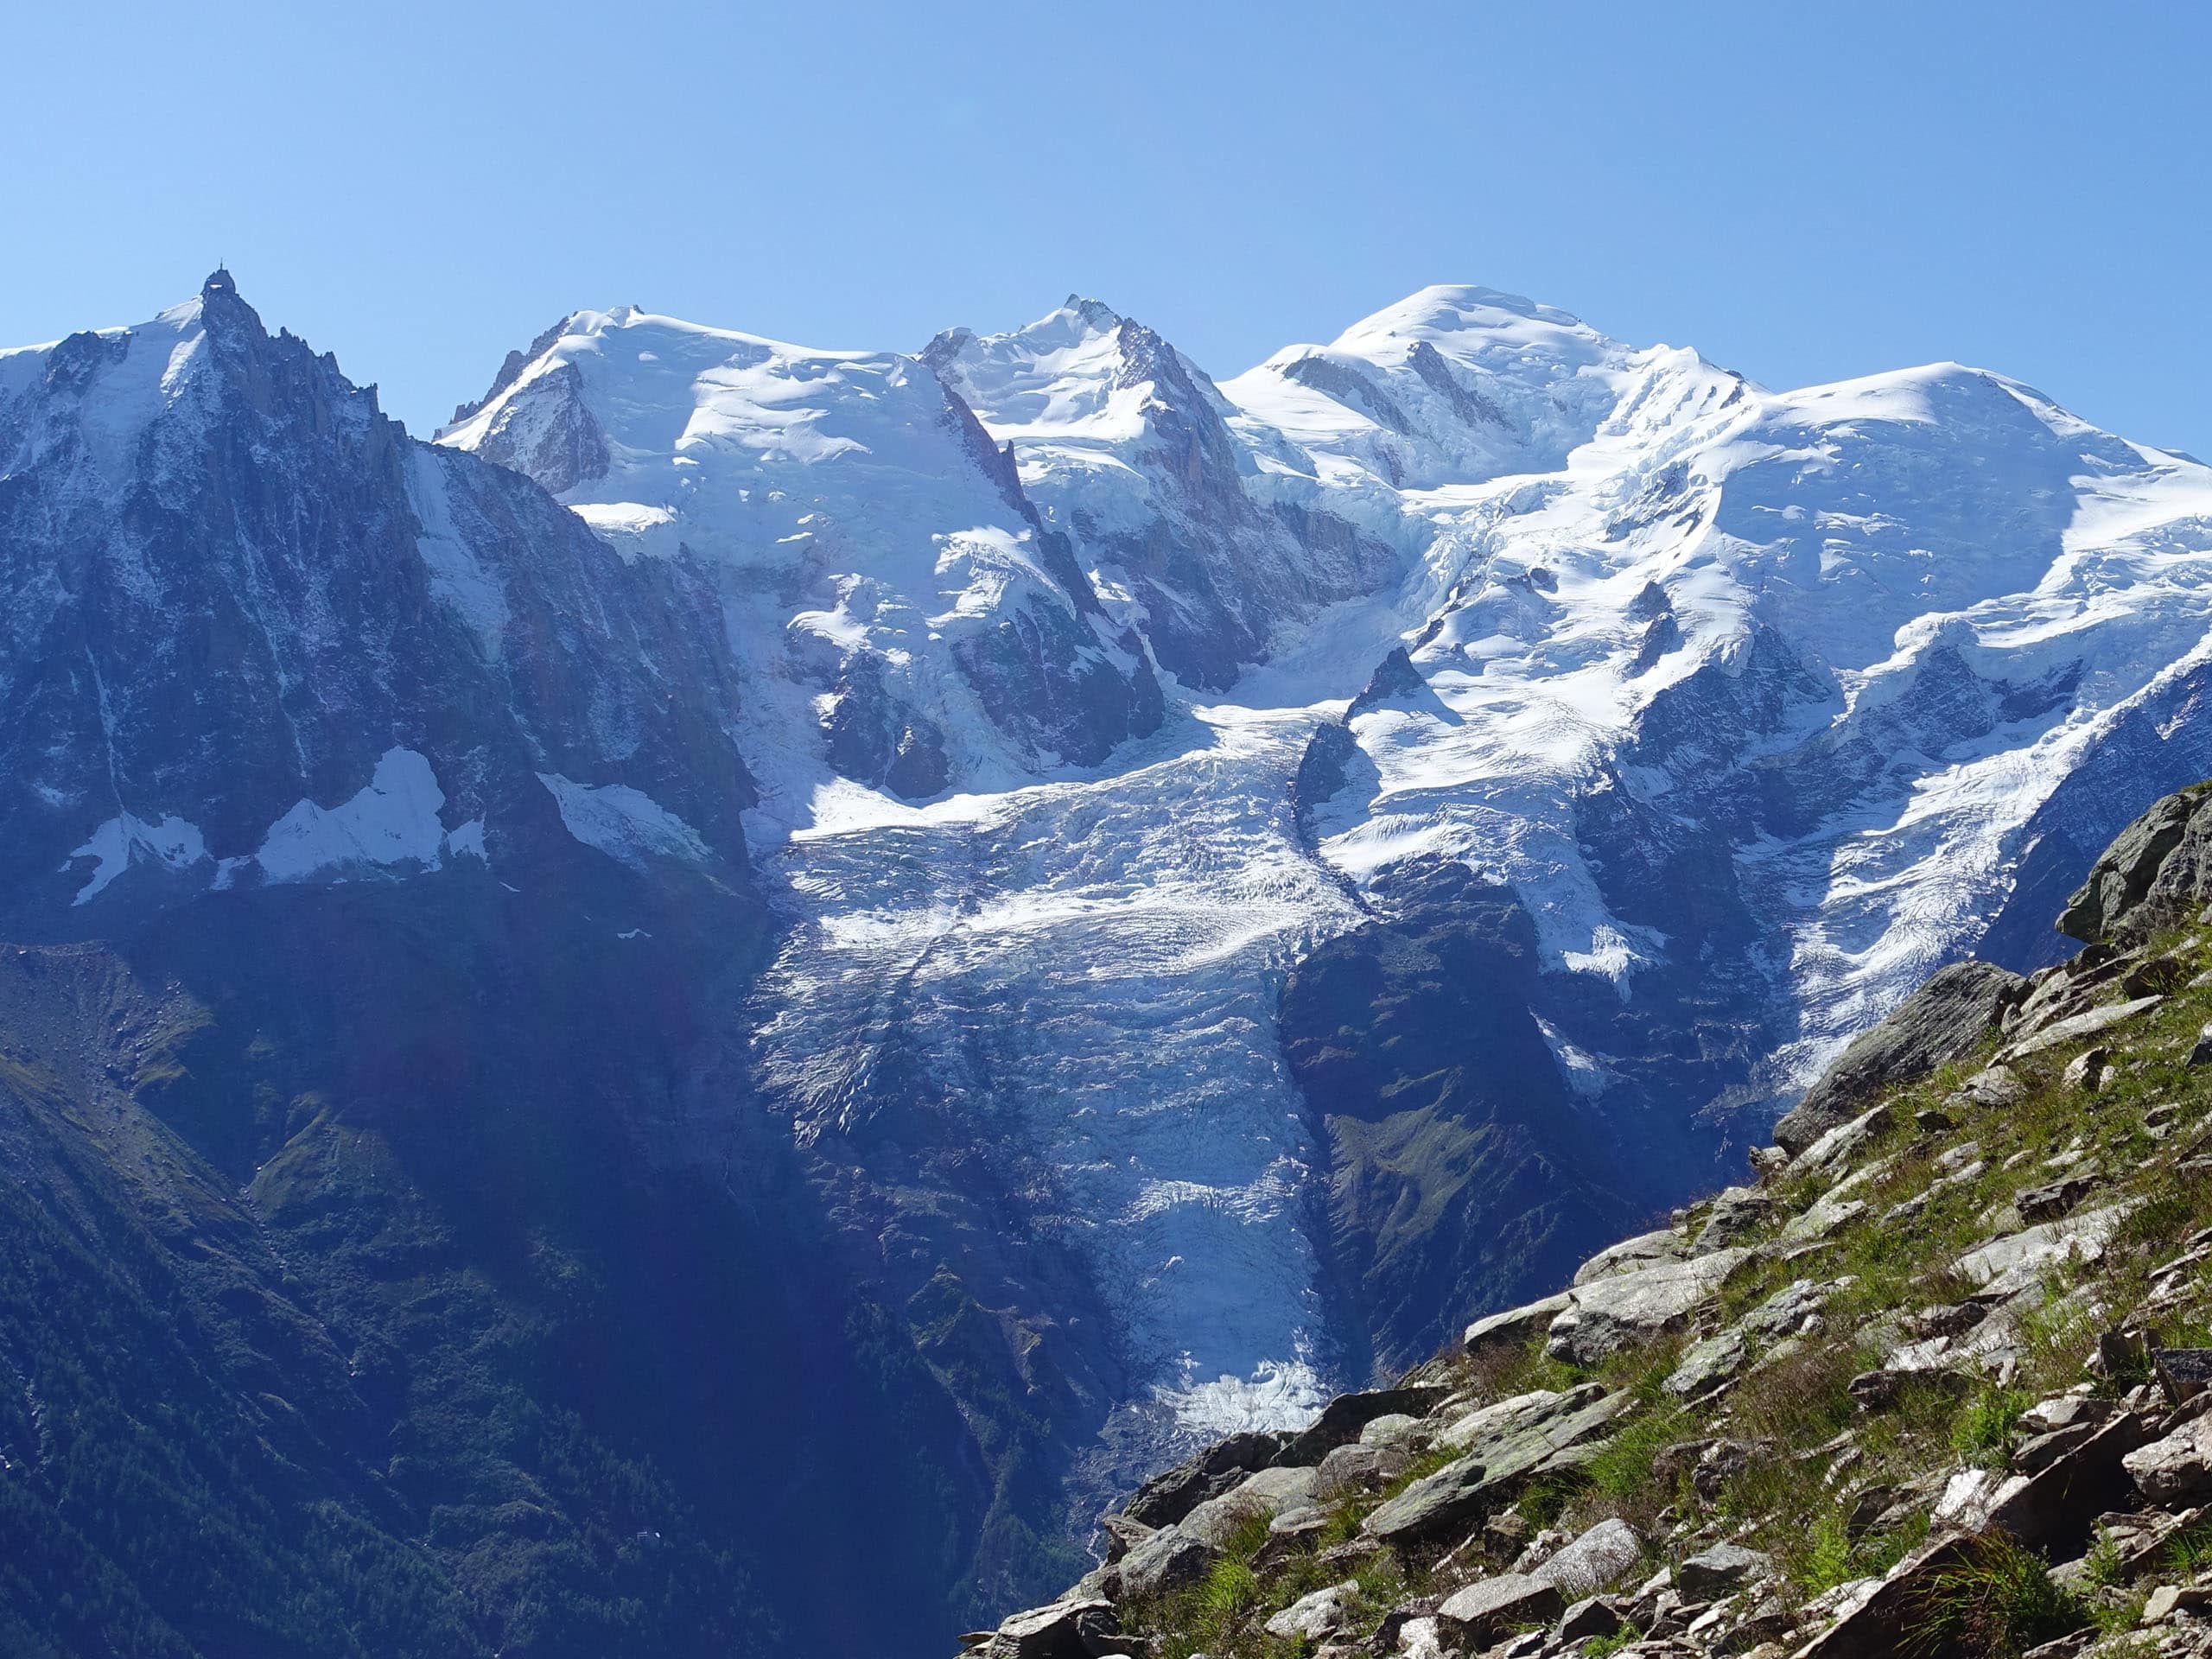 Mont Blanc’s height changes due to the snow capping the top